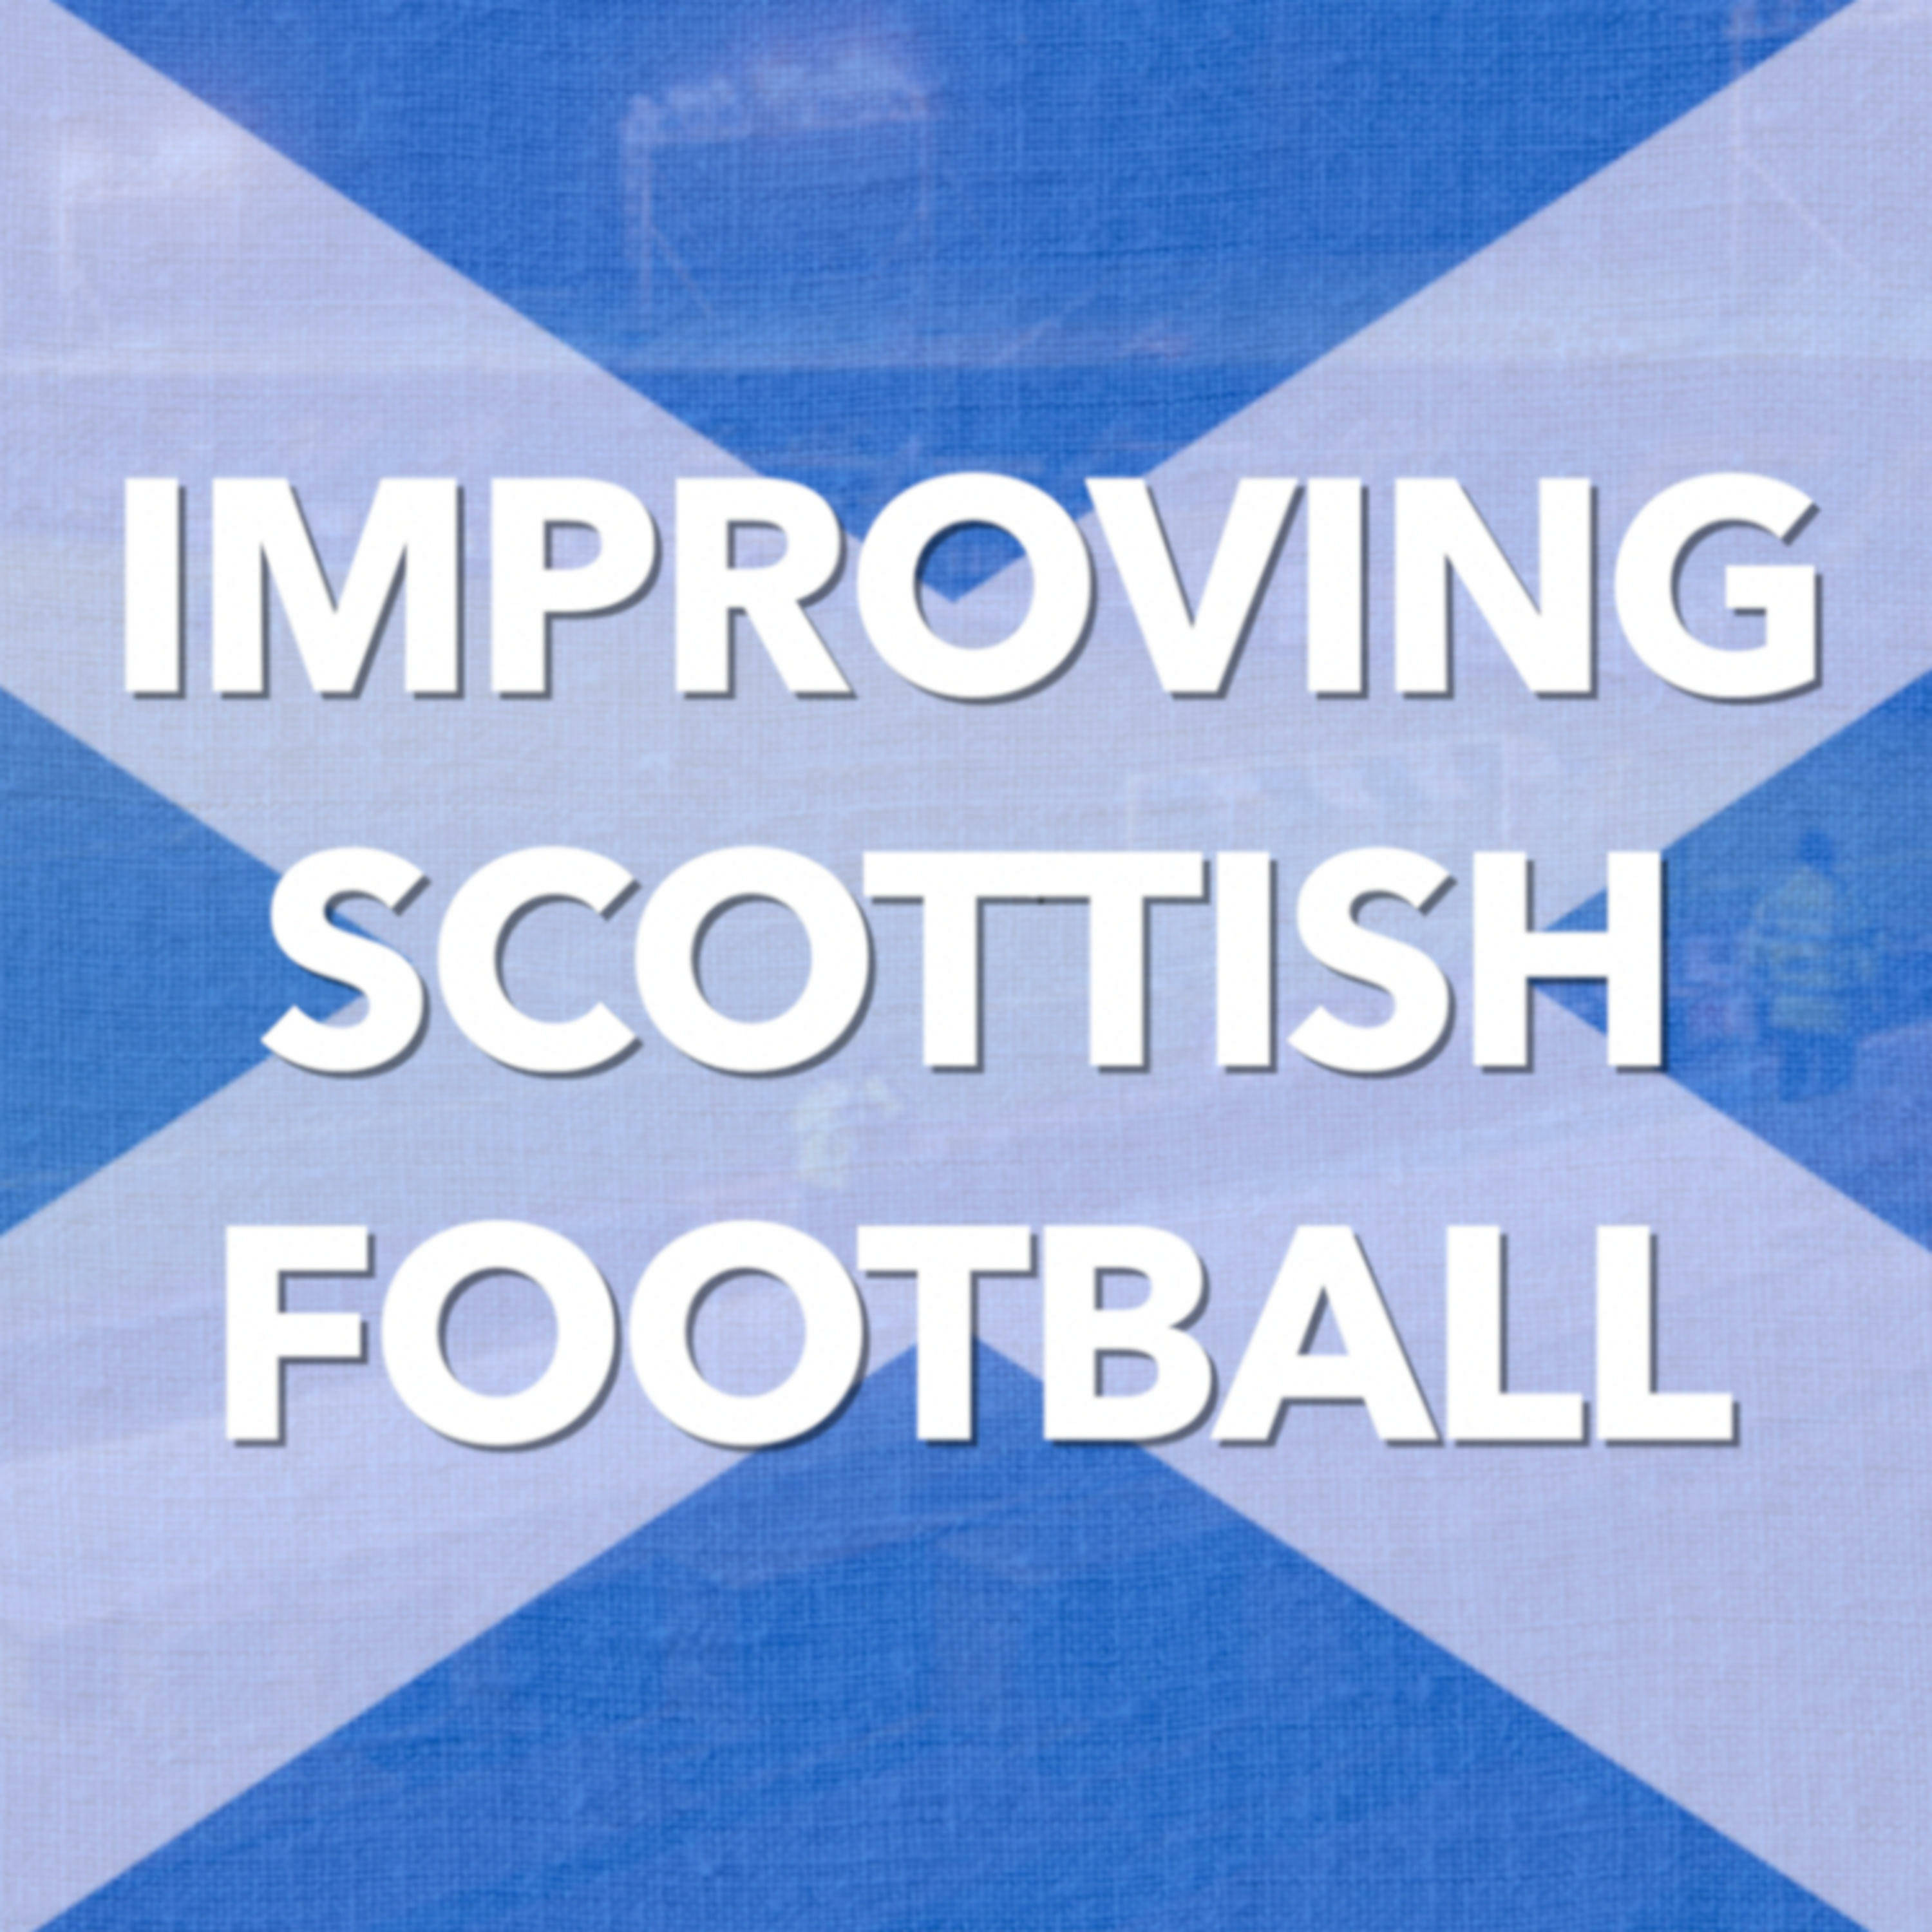 How tough is the economic outlook for Scottish football?